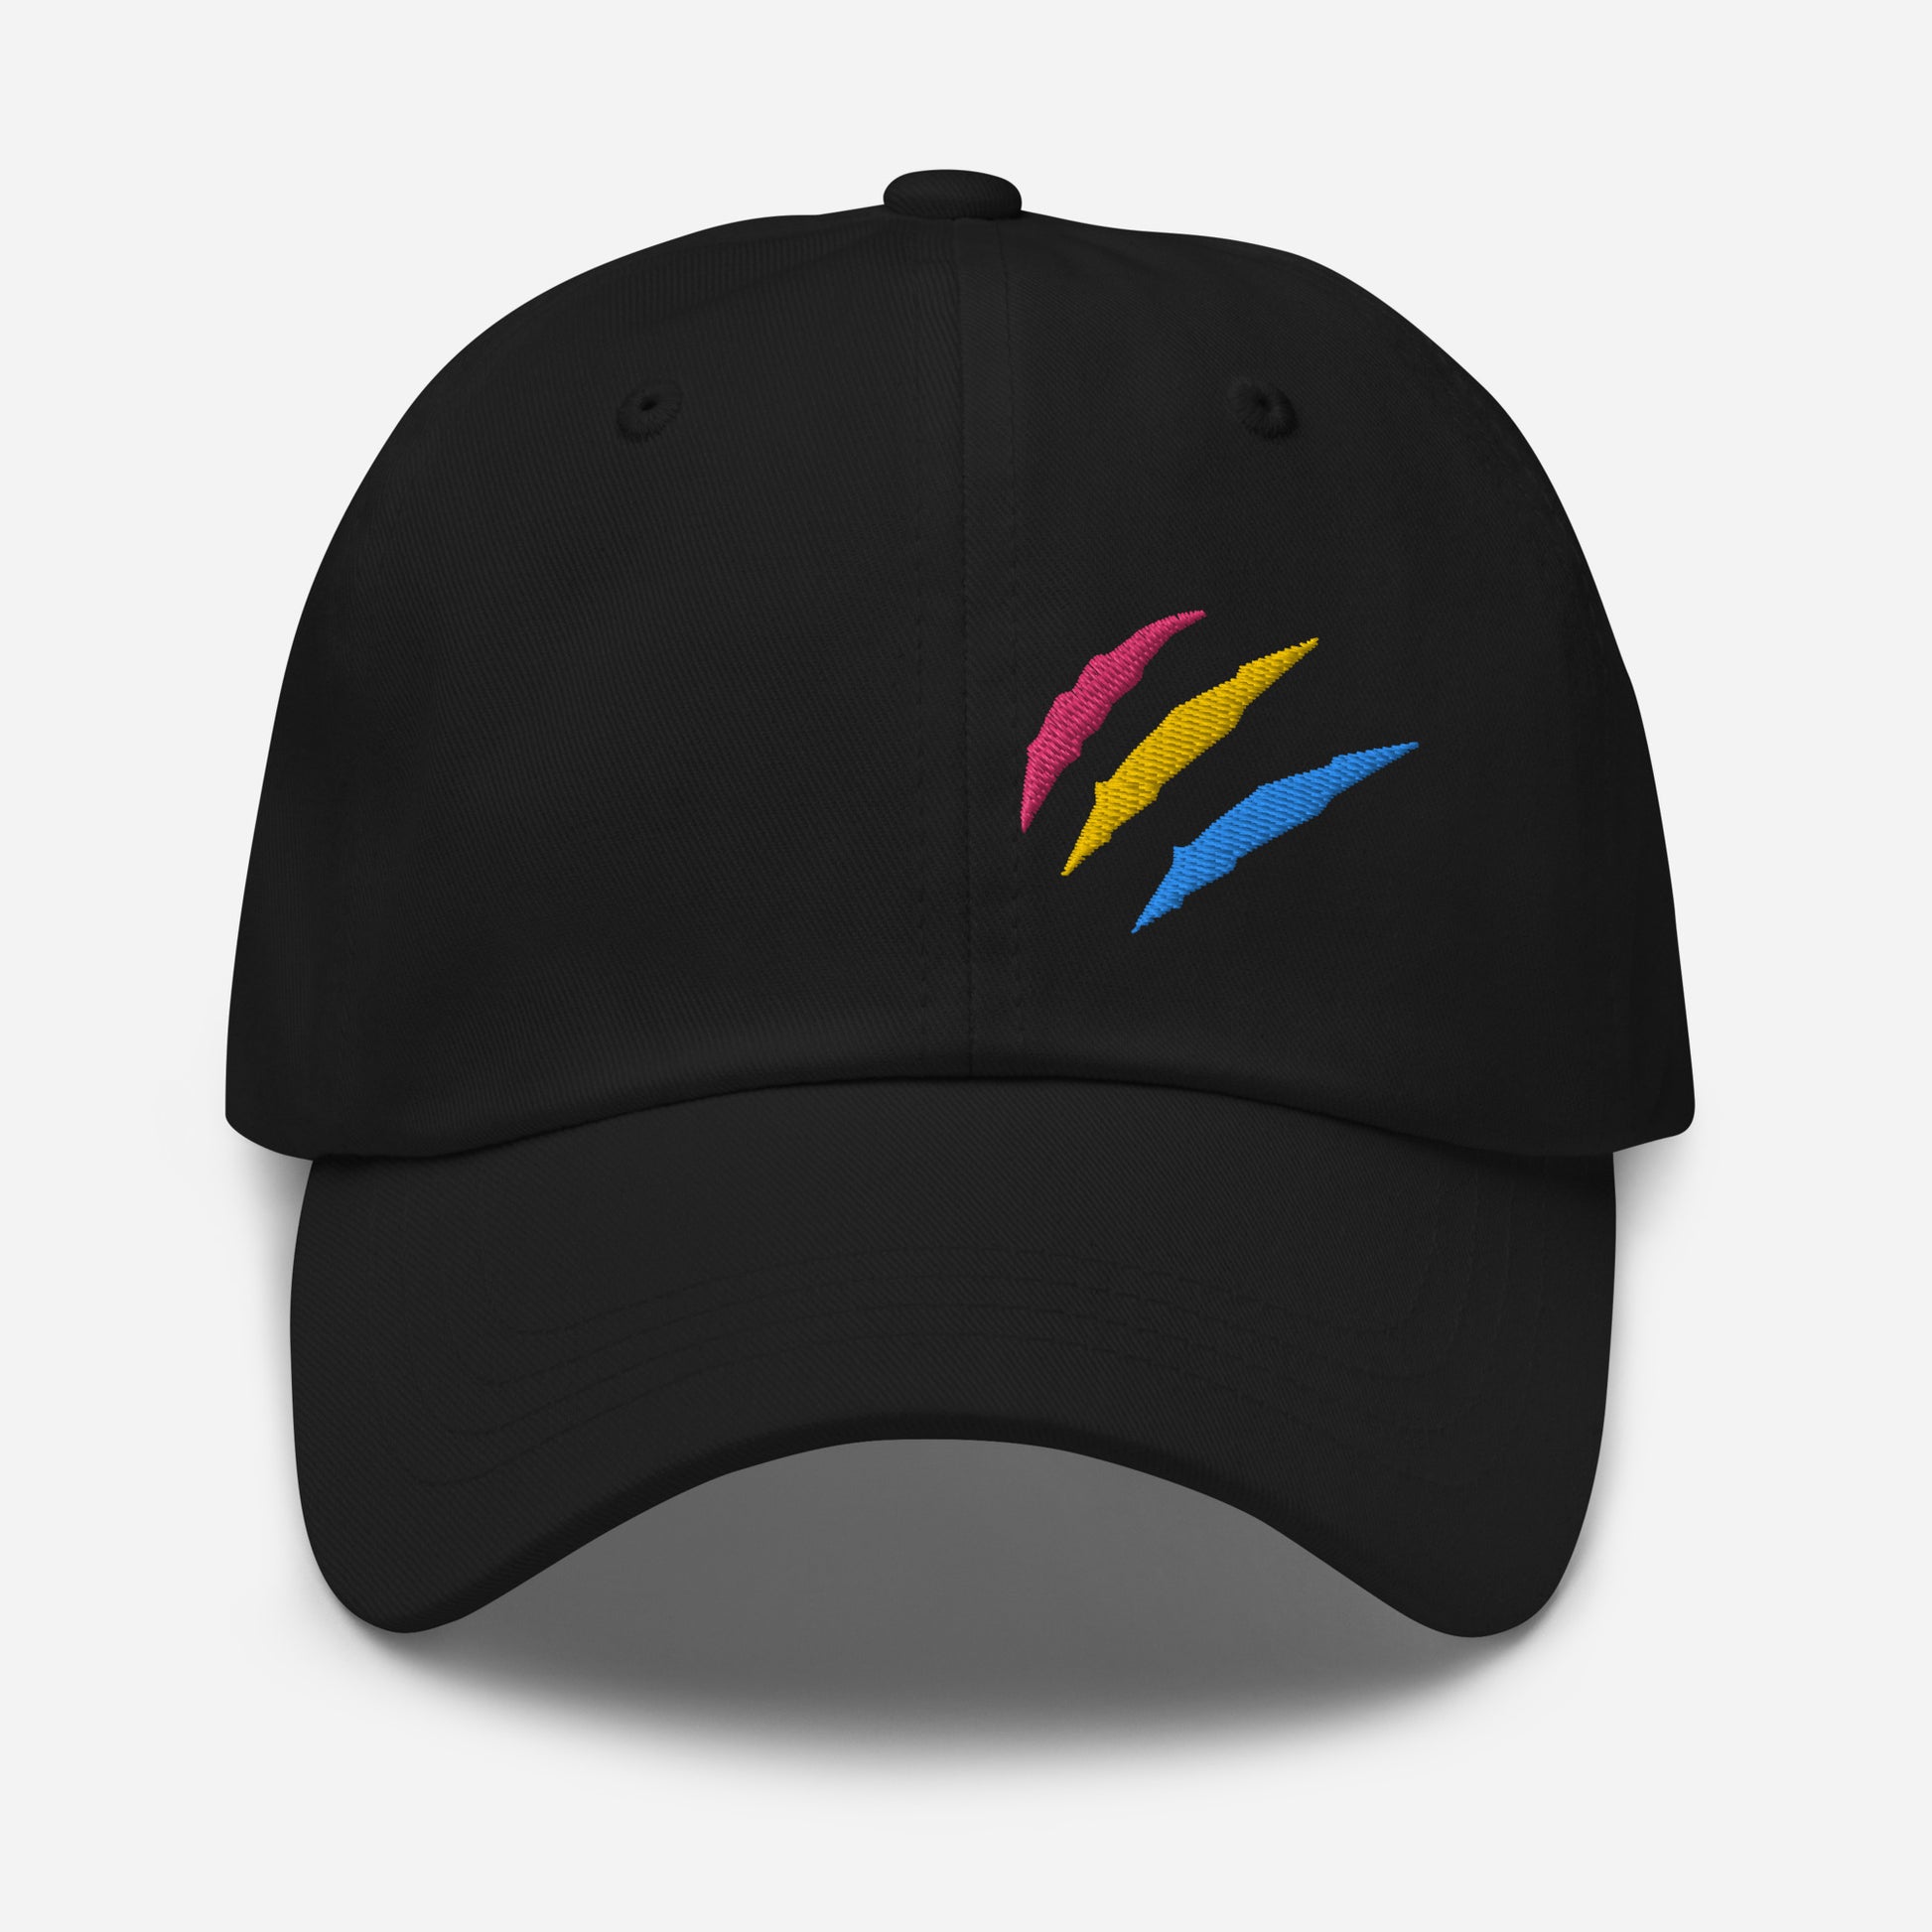 Black baseball hat featuring pansexual pride scratch mark embroidery with a low profile, adjustable strap.